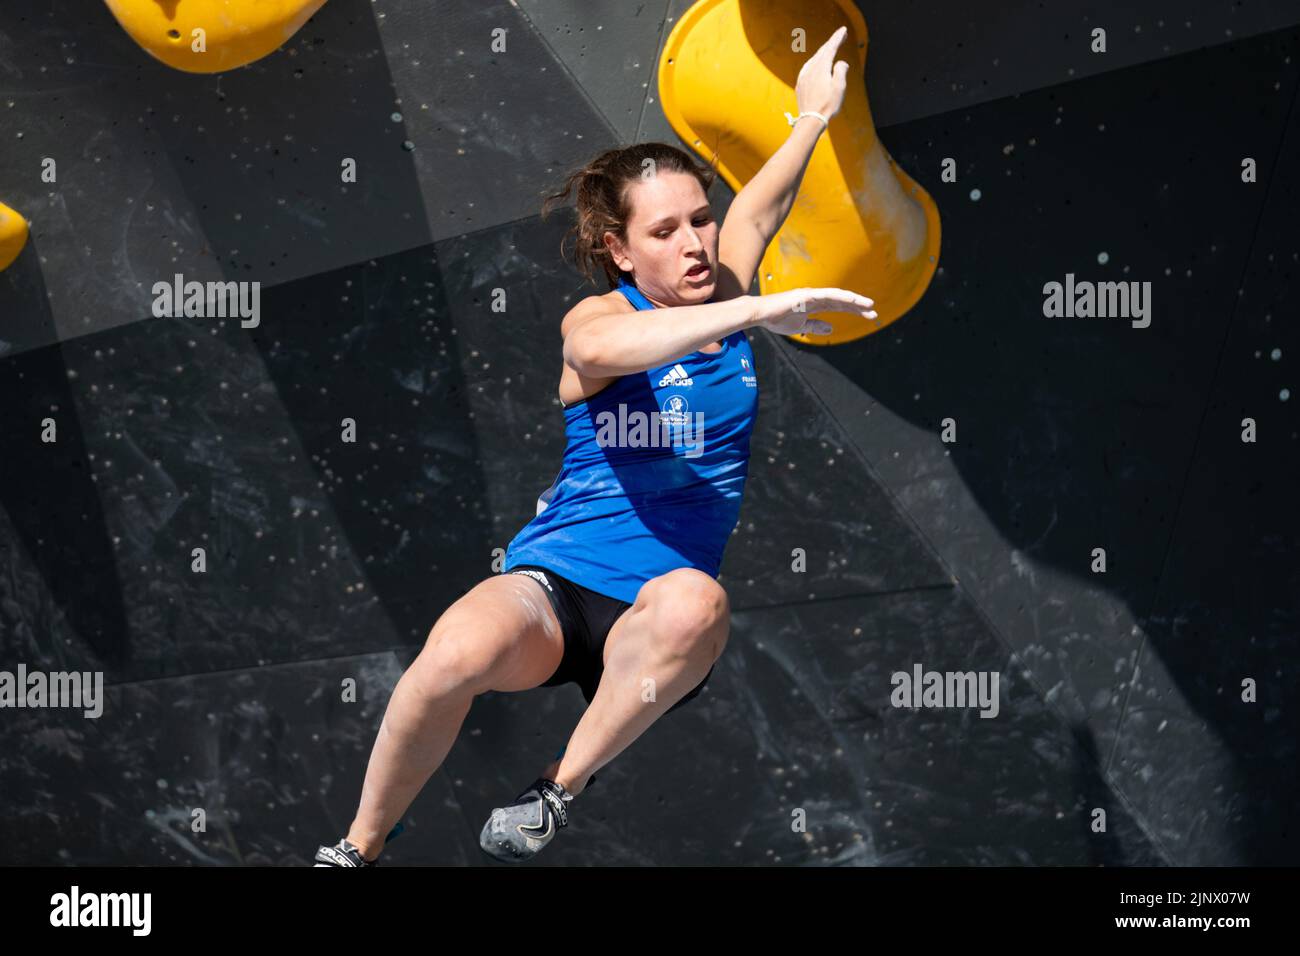 Munich, Germany. 14th Aug, 2022. Munich, Germany, August 14th 2022: Flavy Cohaut (FRA) in action during the Sport Climbing Women's Boulder Semi Final at Koenigsplatz at the Munich 2022 European Championships in Munich, Germany (Liam Asman/SPP) Credit: SPP Sport Press Photo. /Alamy Live News Stock Photo